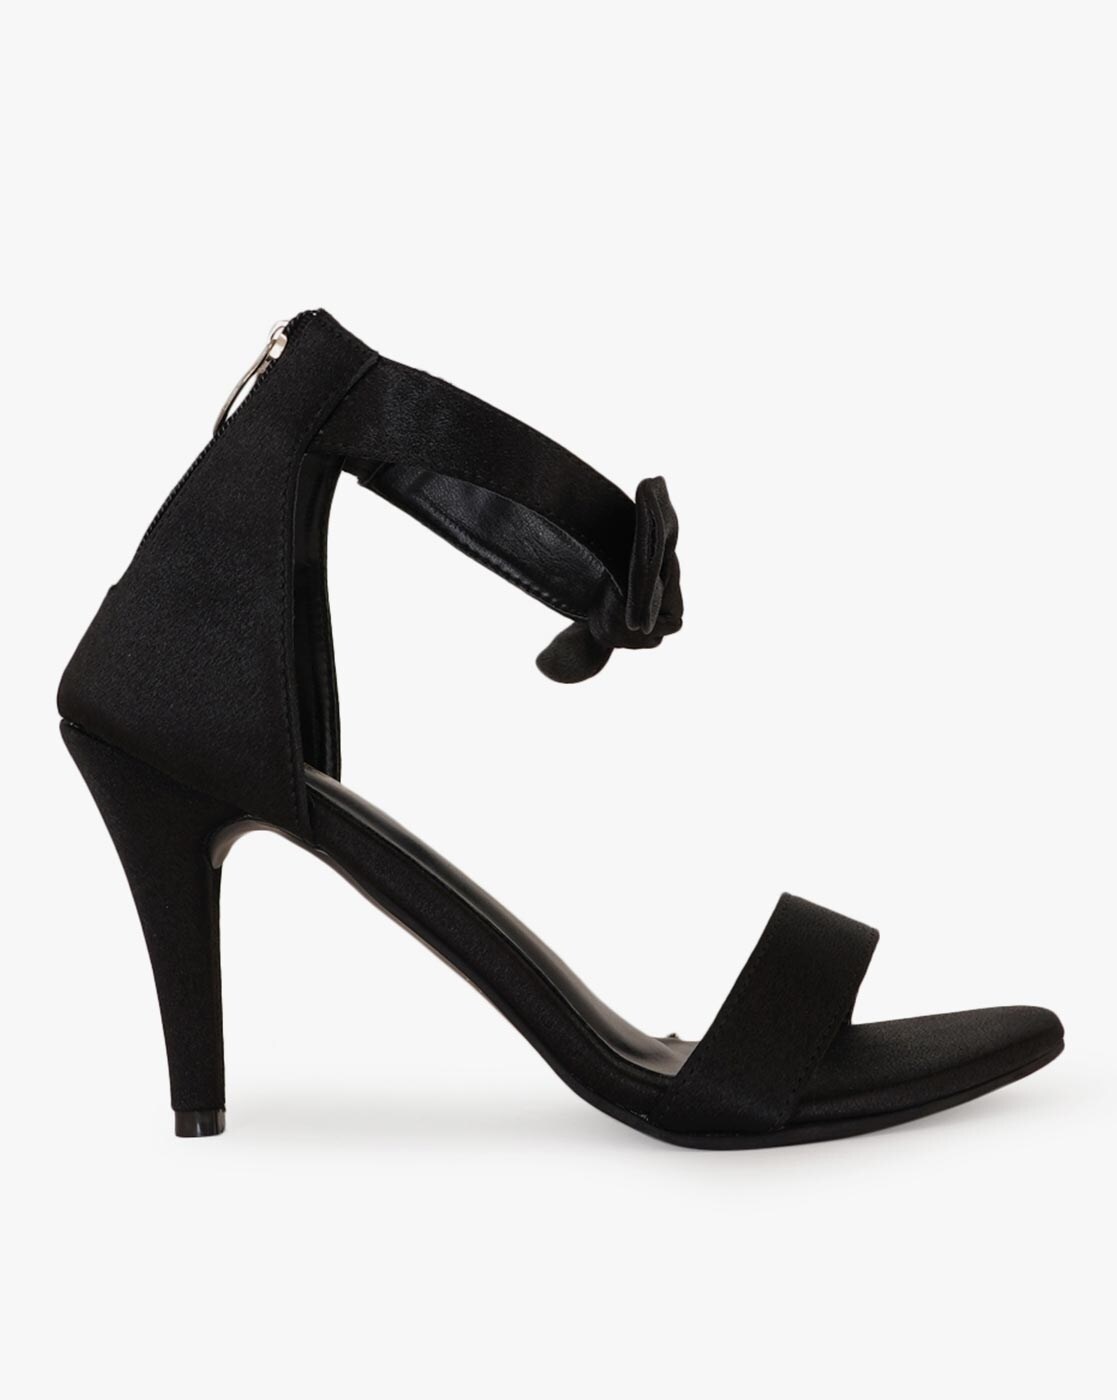 FREE with any purchase)New Look black heels, Women's Fashion, Footwear,  Heels on Carousell